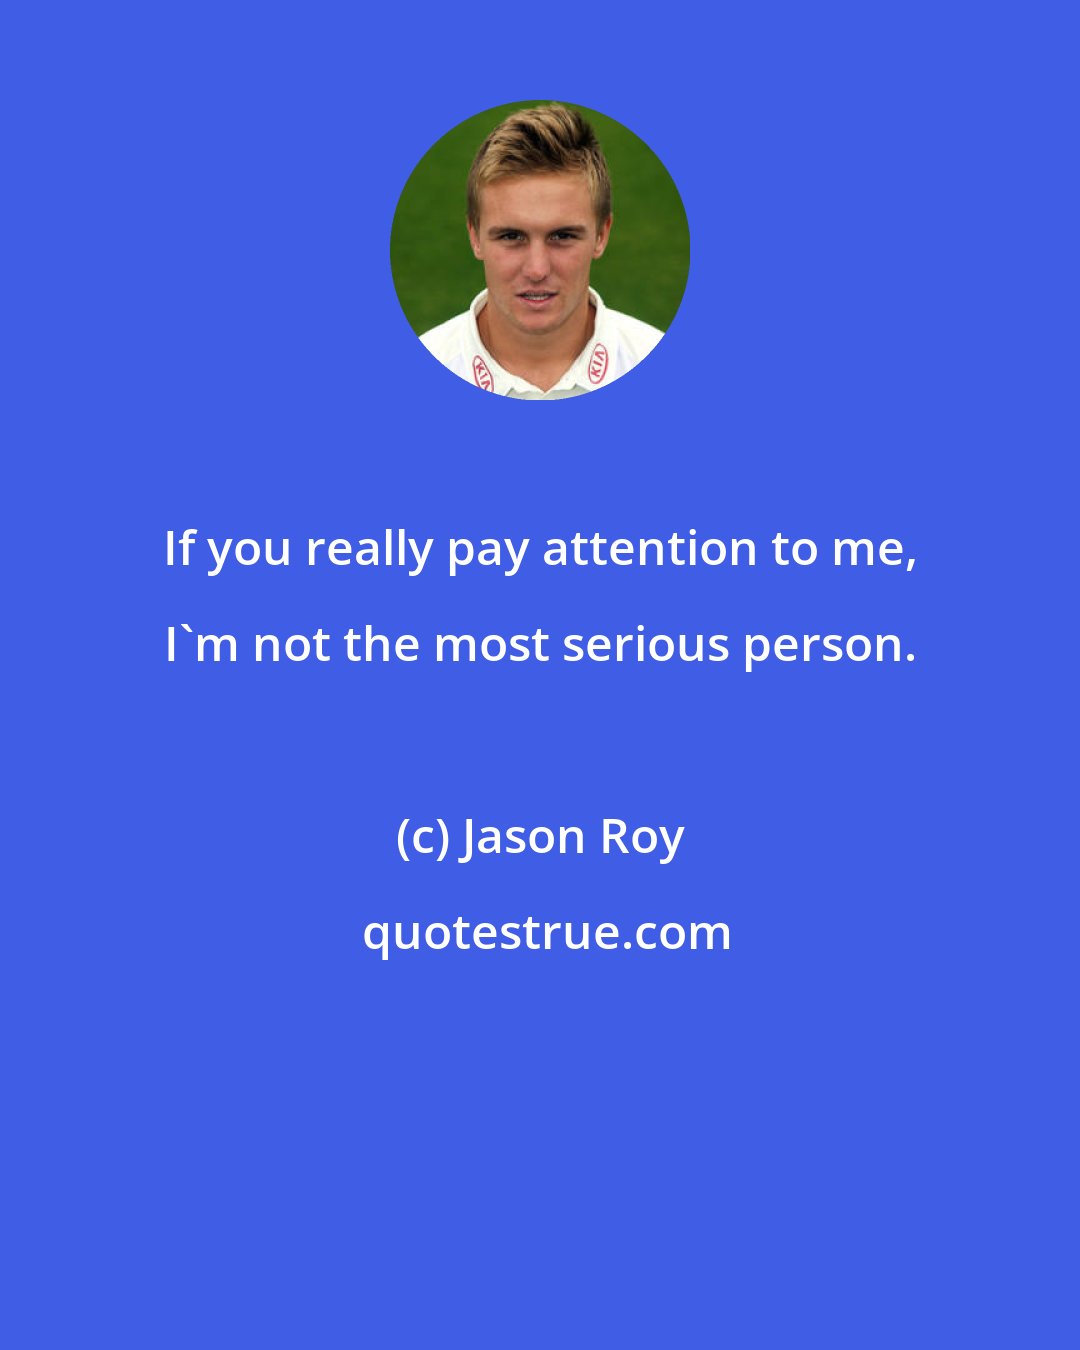 Jason Roy: If you really pay attention to me, I'm not the most serious person.